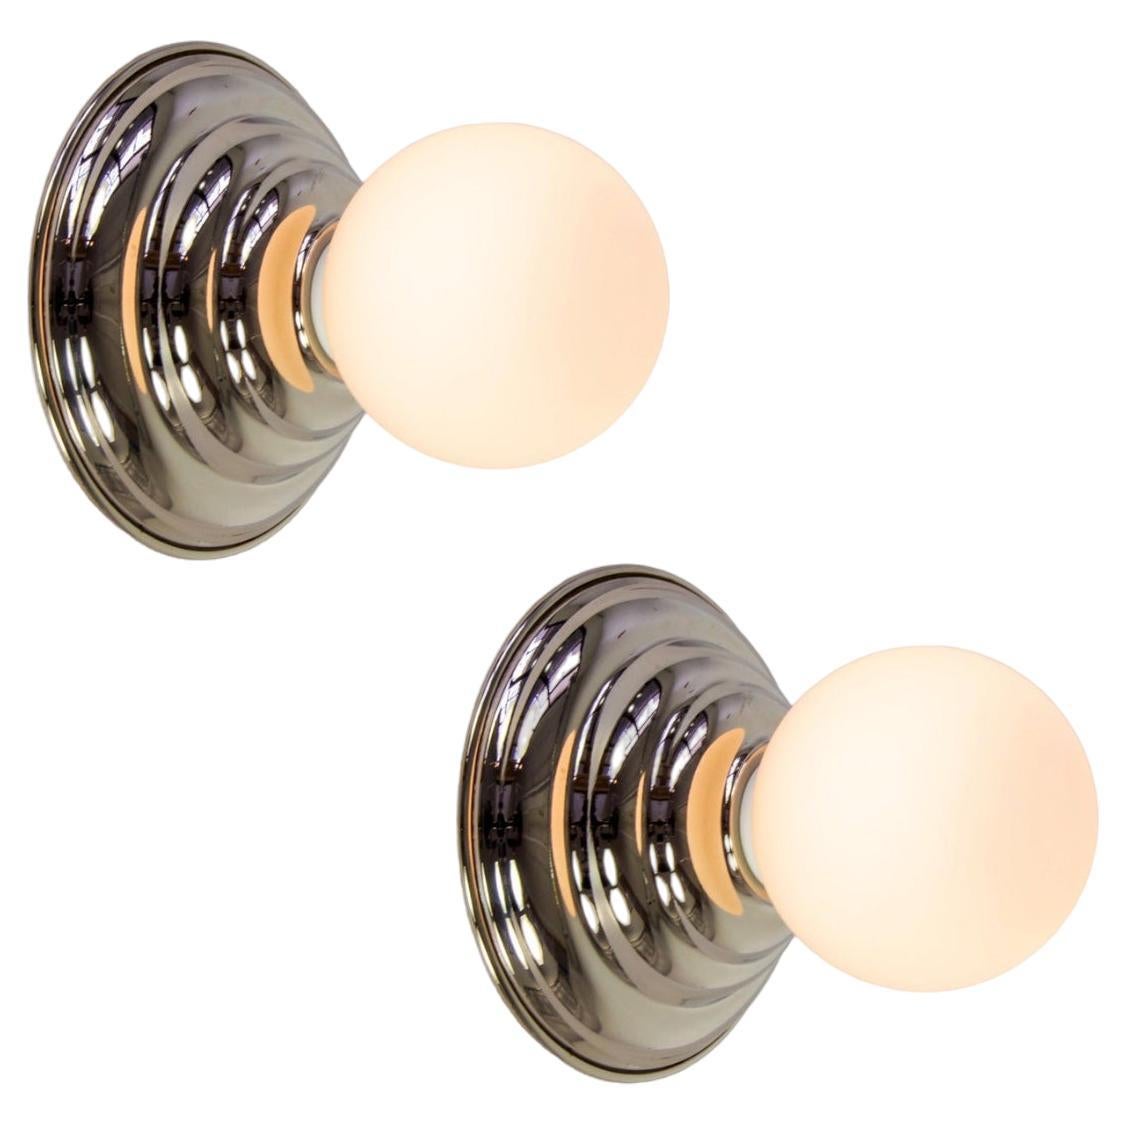 Pair of Hive Sconces by Research.Lighting, Polished Nickel, Made to Order For Sale